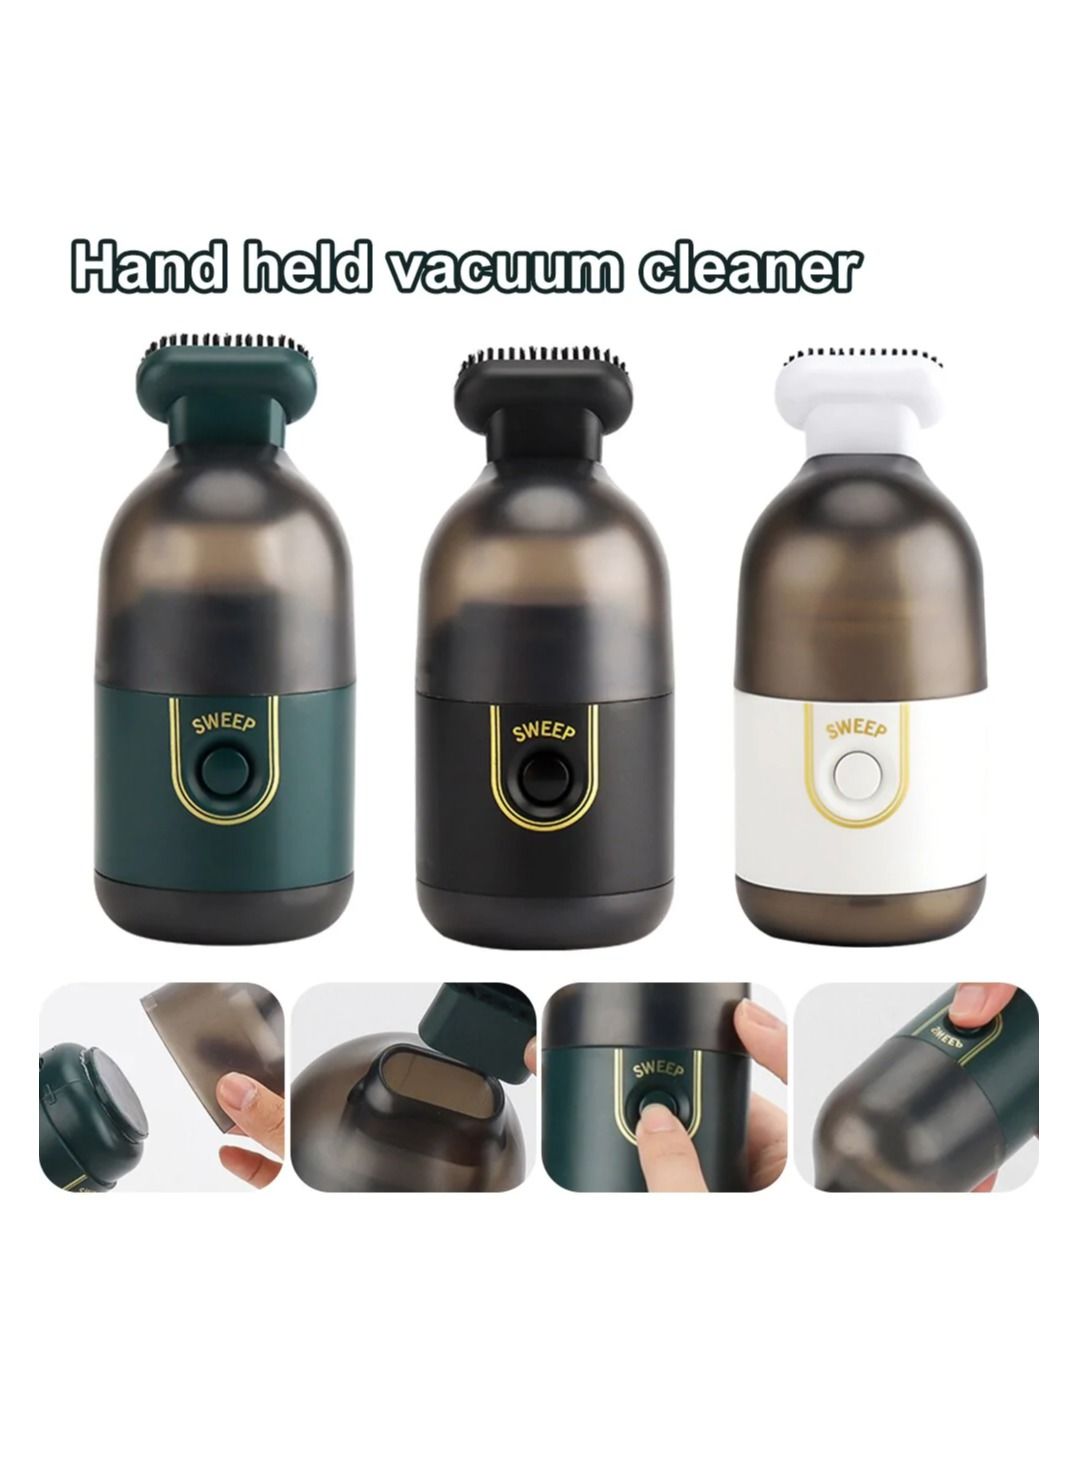 Desktop Vacuum Cleaner Handheld Mini Keyboard Vacuum USB Rechargeable Cordless Vacuum Cleaner Travel Portable Clear Machine for Cleaning Dust Crumbs Computer Cars Sweeper 